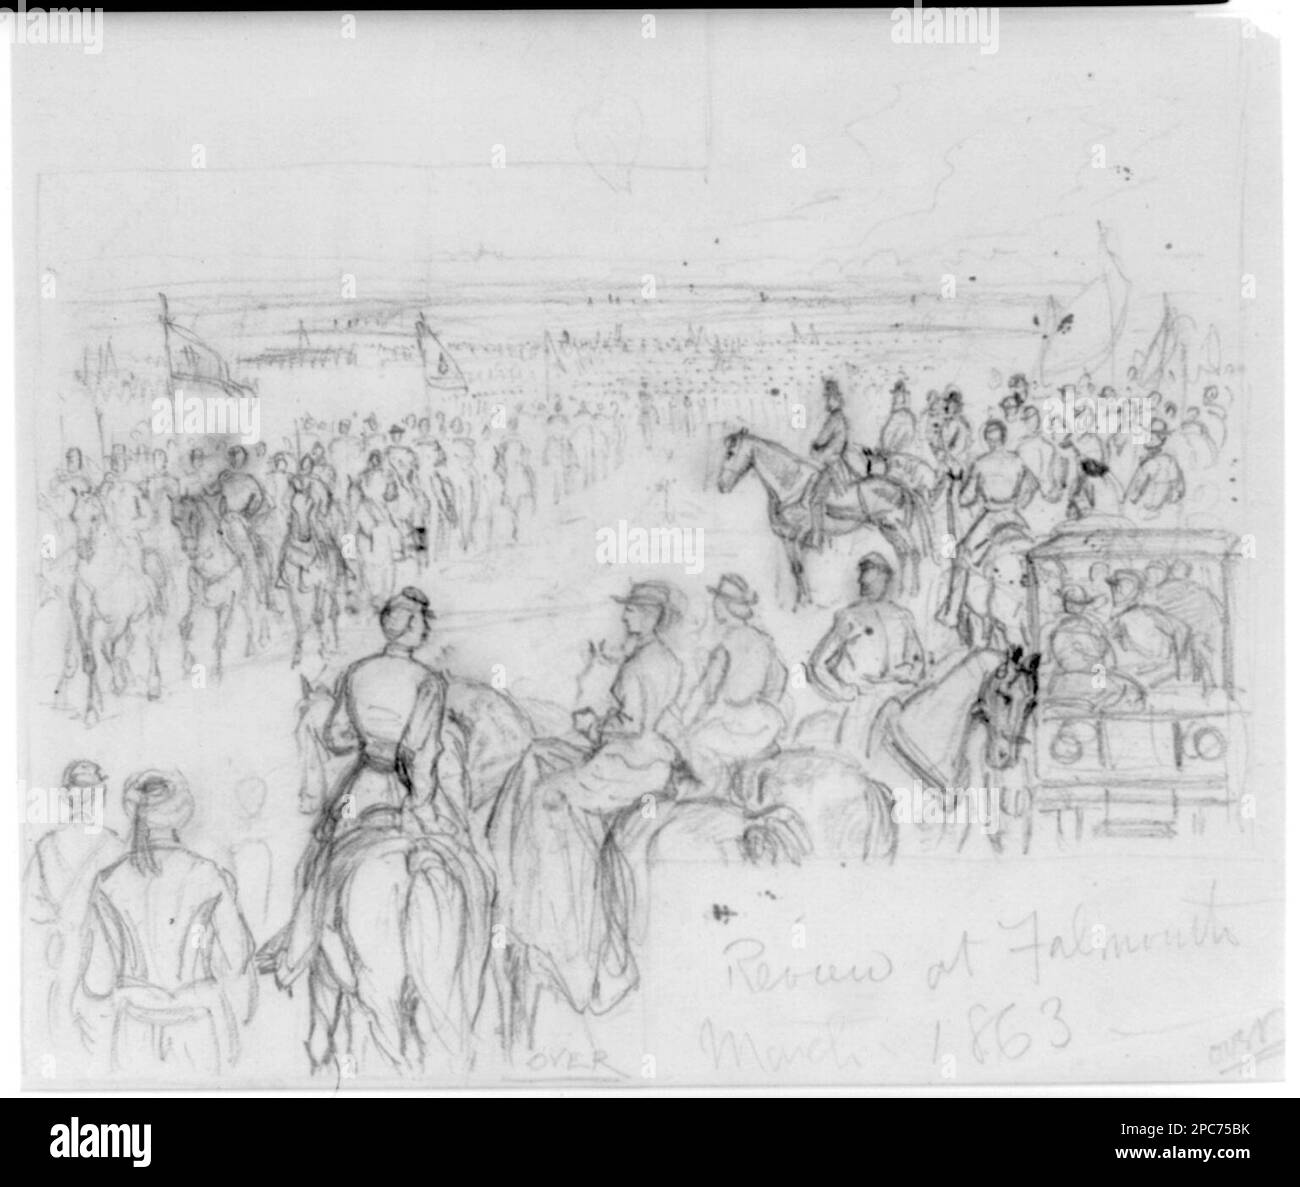 Review at Falmouth. March 1863. Morgan collection of Civil War drawings. Military officers, Union, 1860-1870, Carriages & coaches, 1860-1870, Ships, 1860-1870, Military parades & ceremonies, 1860-1870, Cavalry, Union, 1860-1870, Women, 1860-1870, United States, History, Civil War, 1861-1865, Military personnel, Union, United States, Virginia, Falmouth , United States, Virginia, Rappahannock River Stock Photo